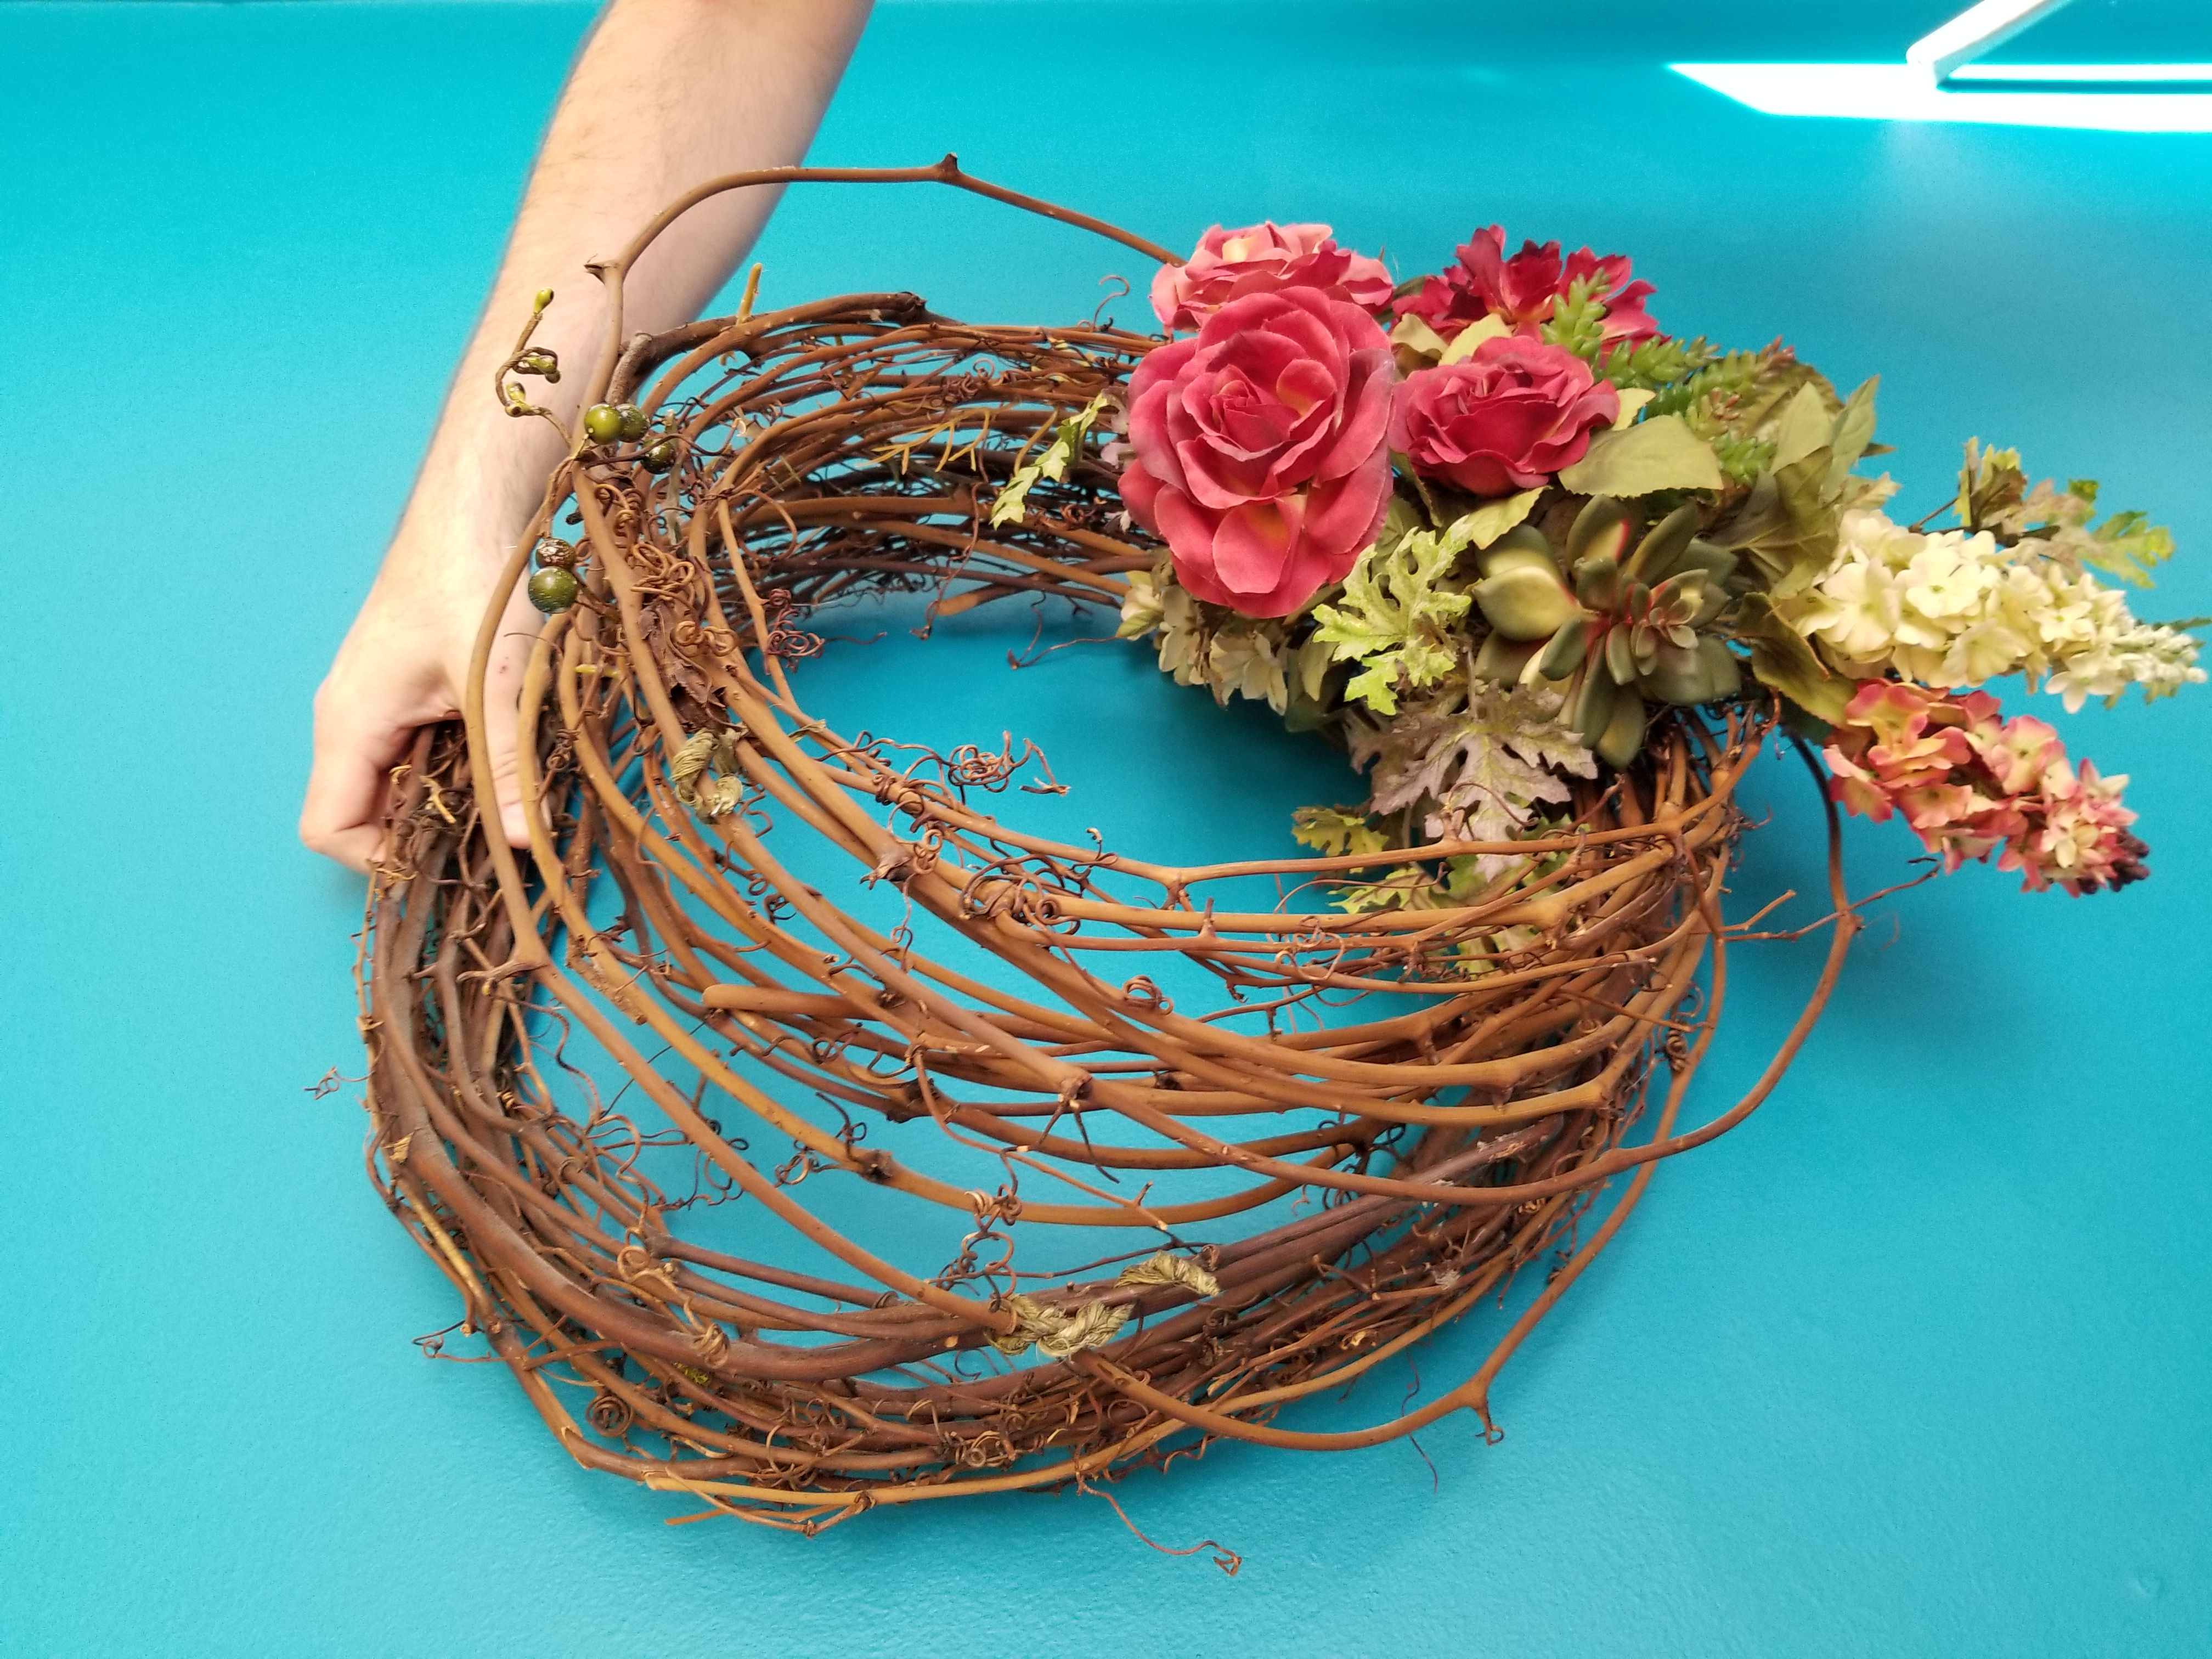 A Fall Wreath  create your own graoevine 10 wreath with flowers and succulents plant nite project by Yaymaker